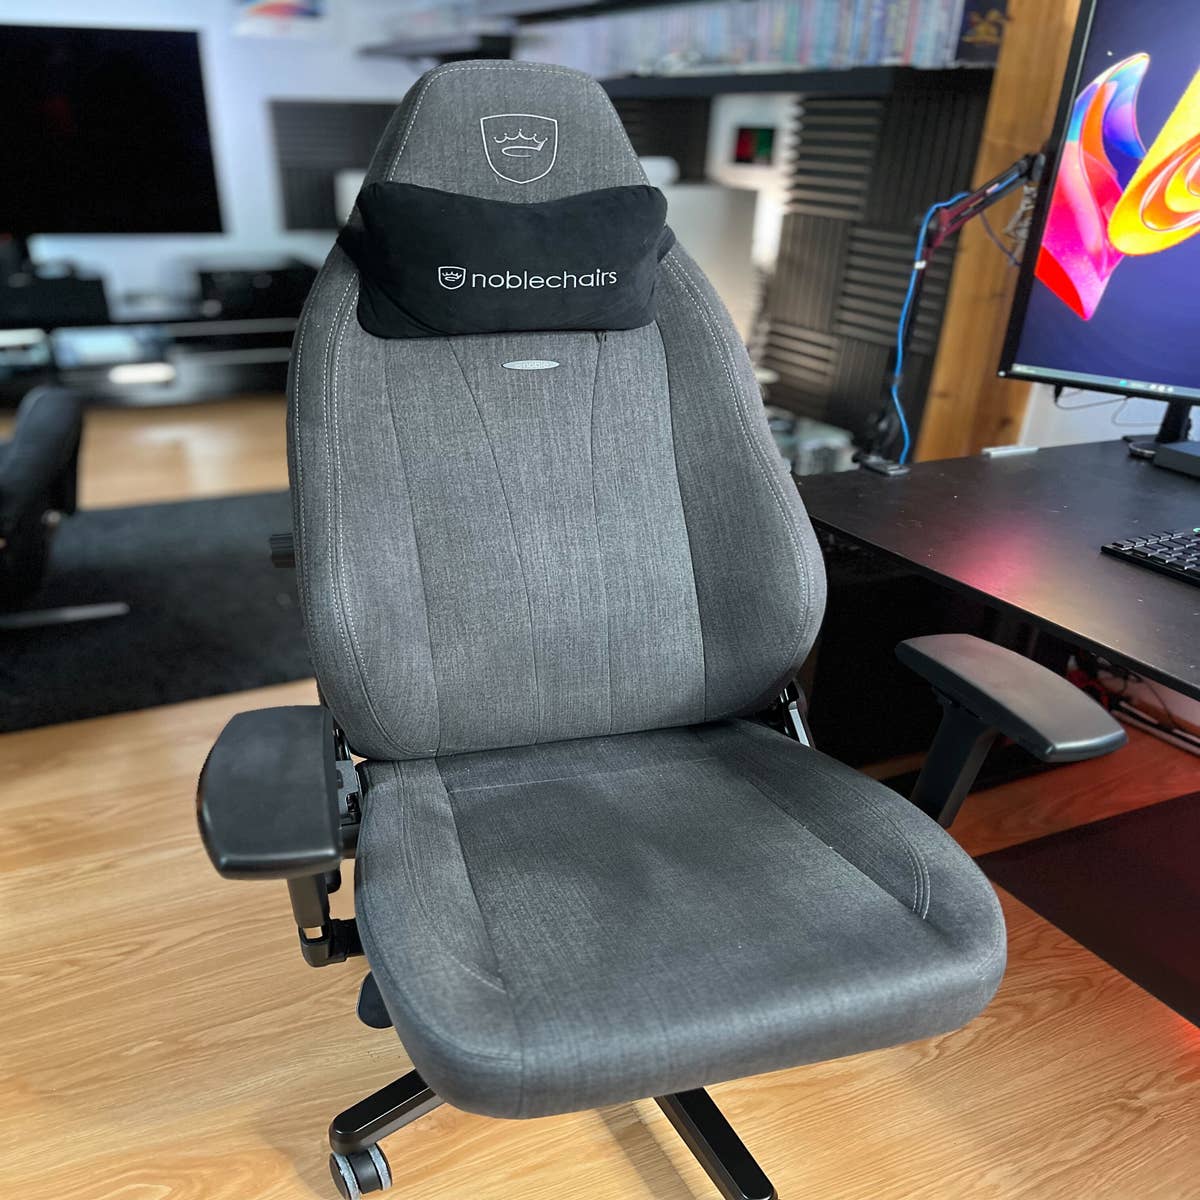 Noblechairs Legend TX review: a premium fabric chair with plenty of  adjustability